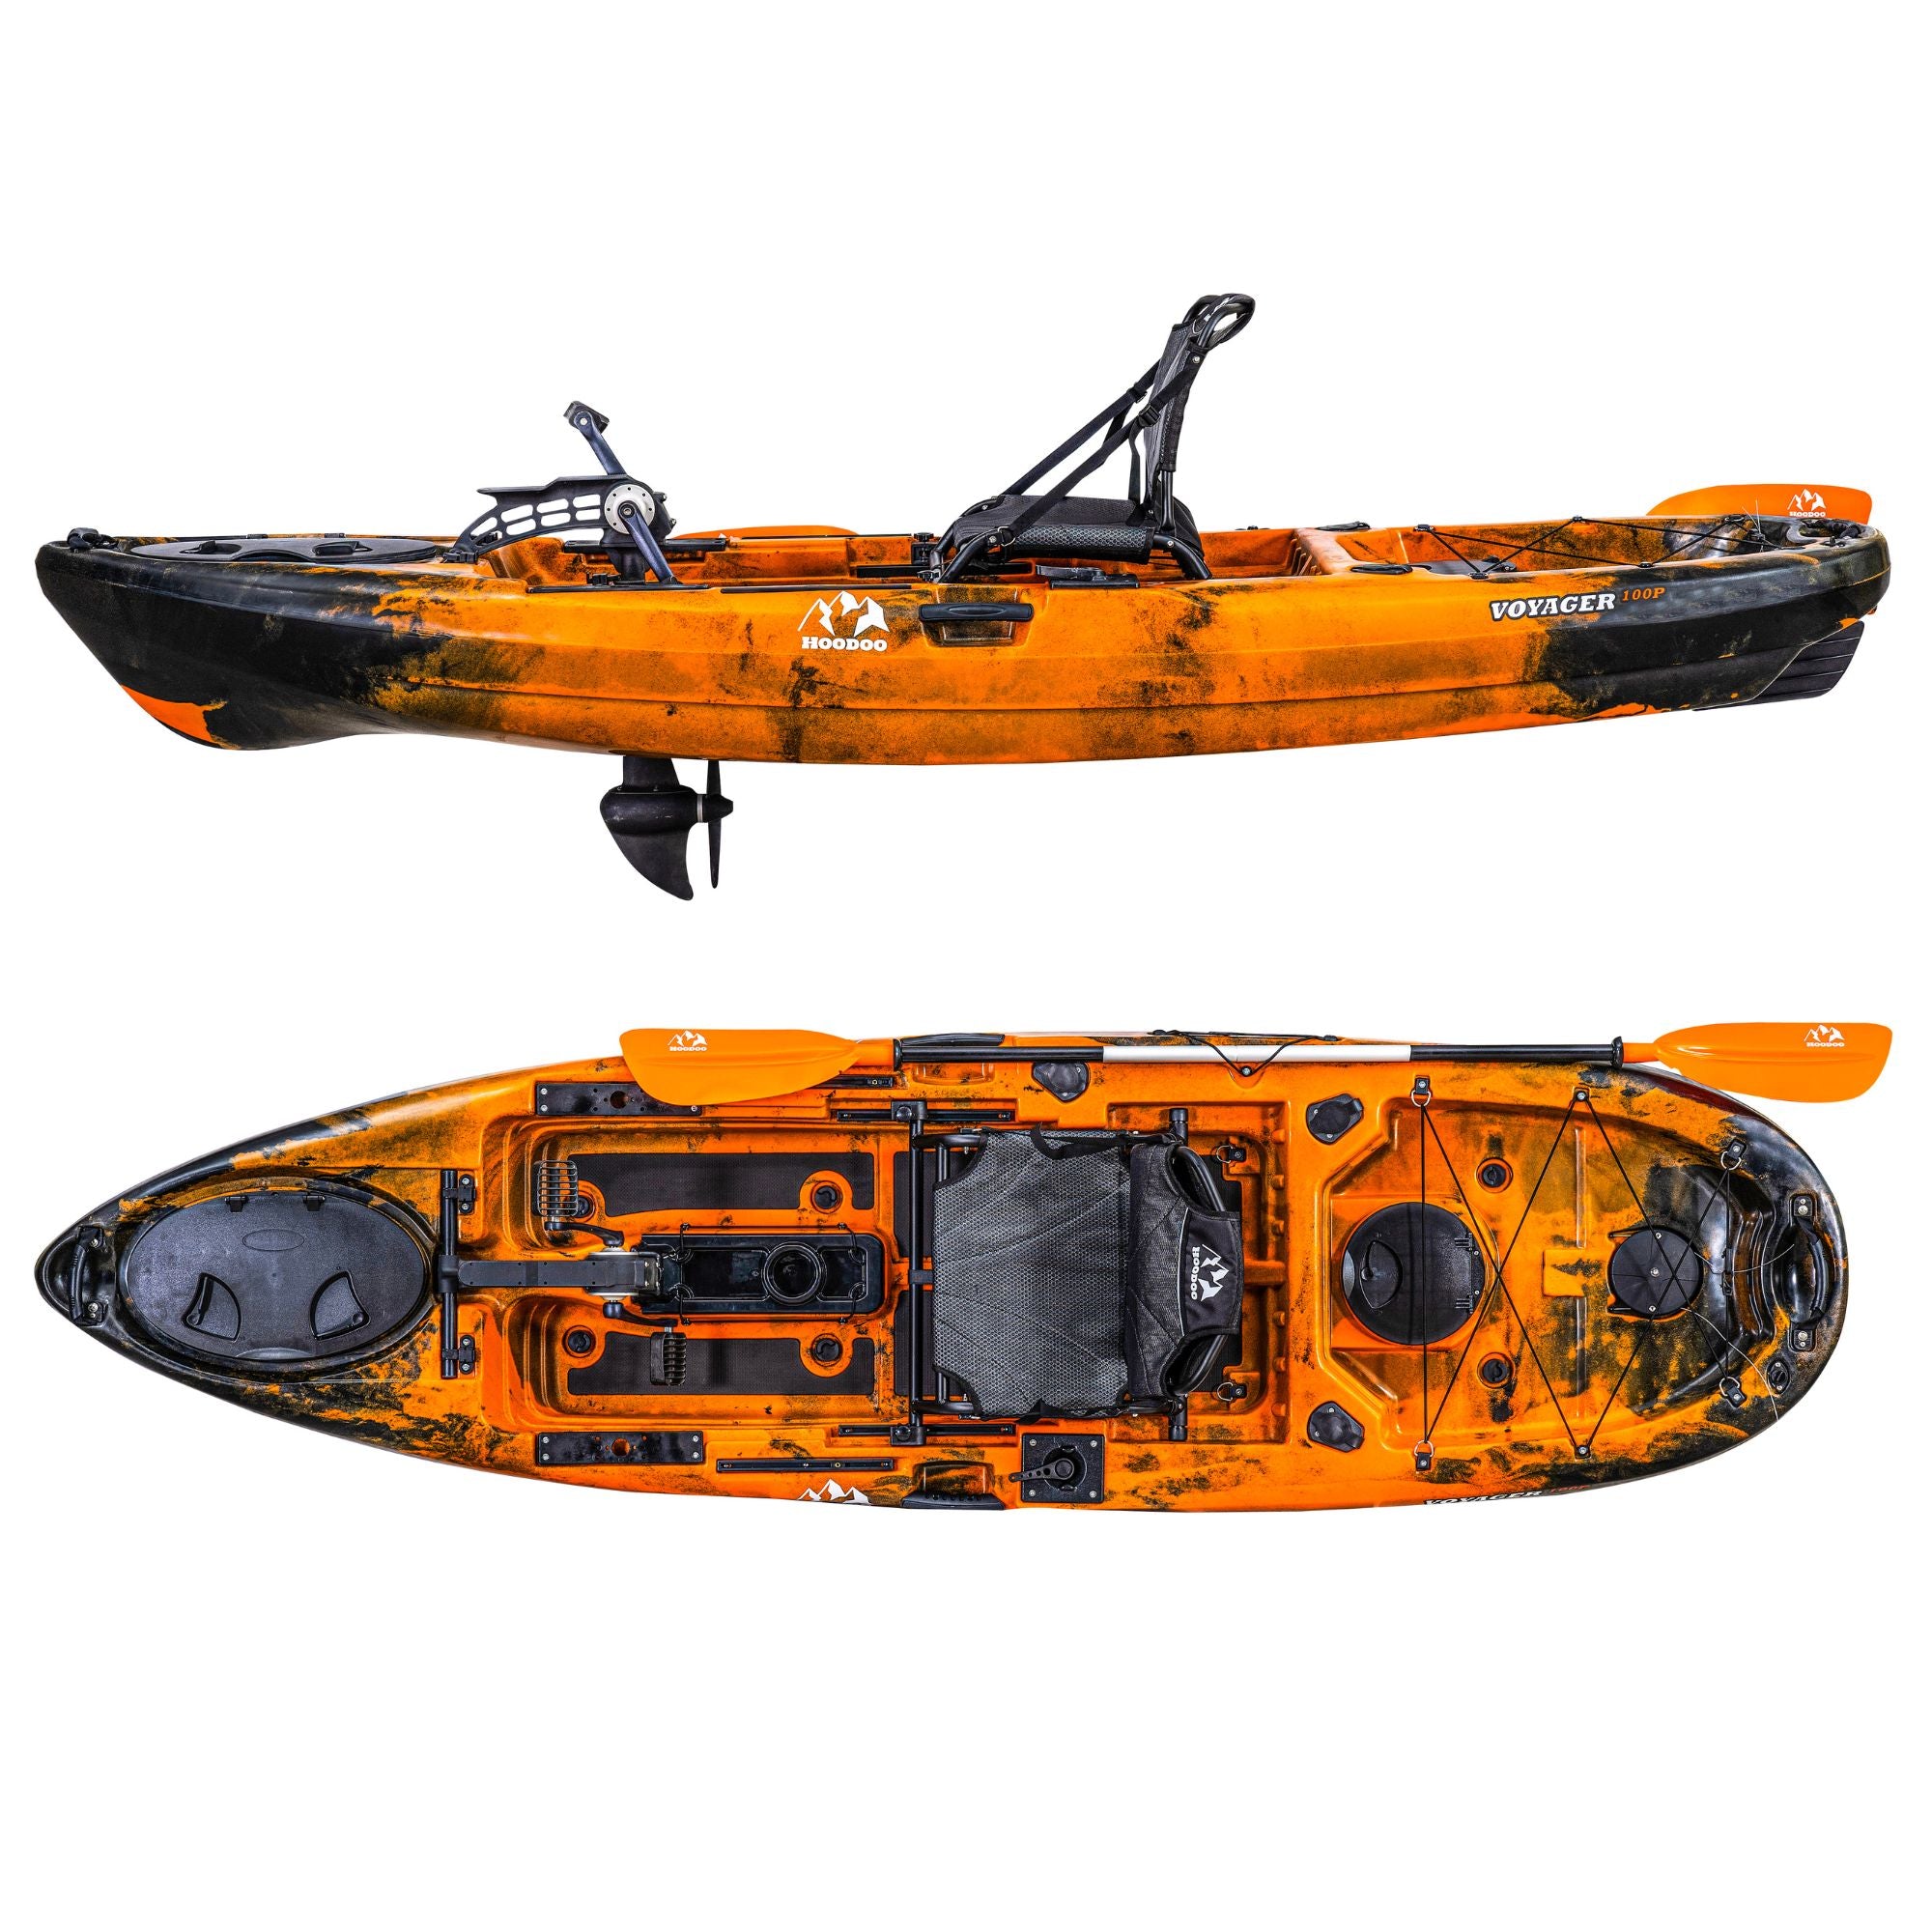 A better two-person fishing boat – STABLE KAYAKS AND MICROSKIFFS